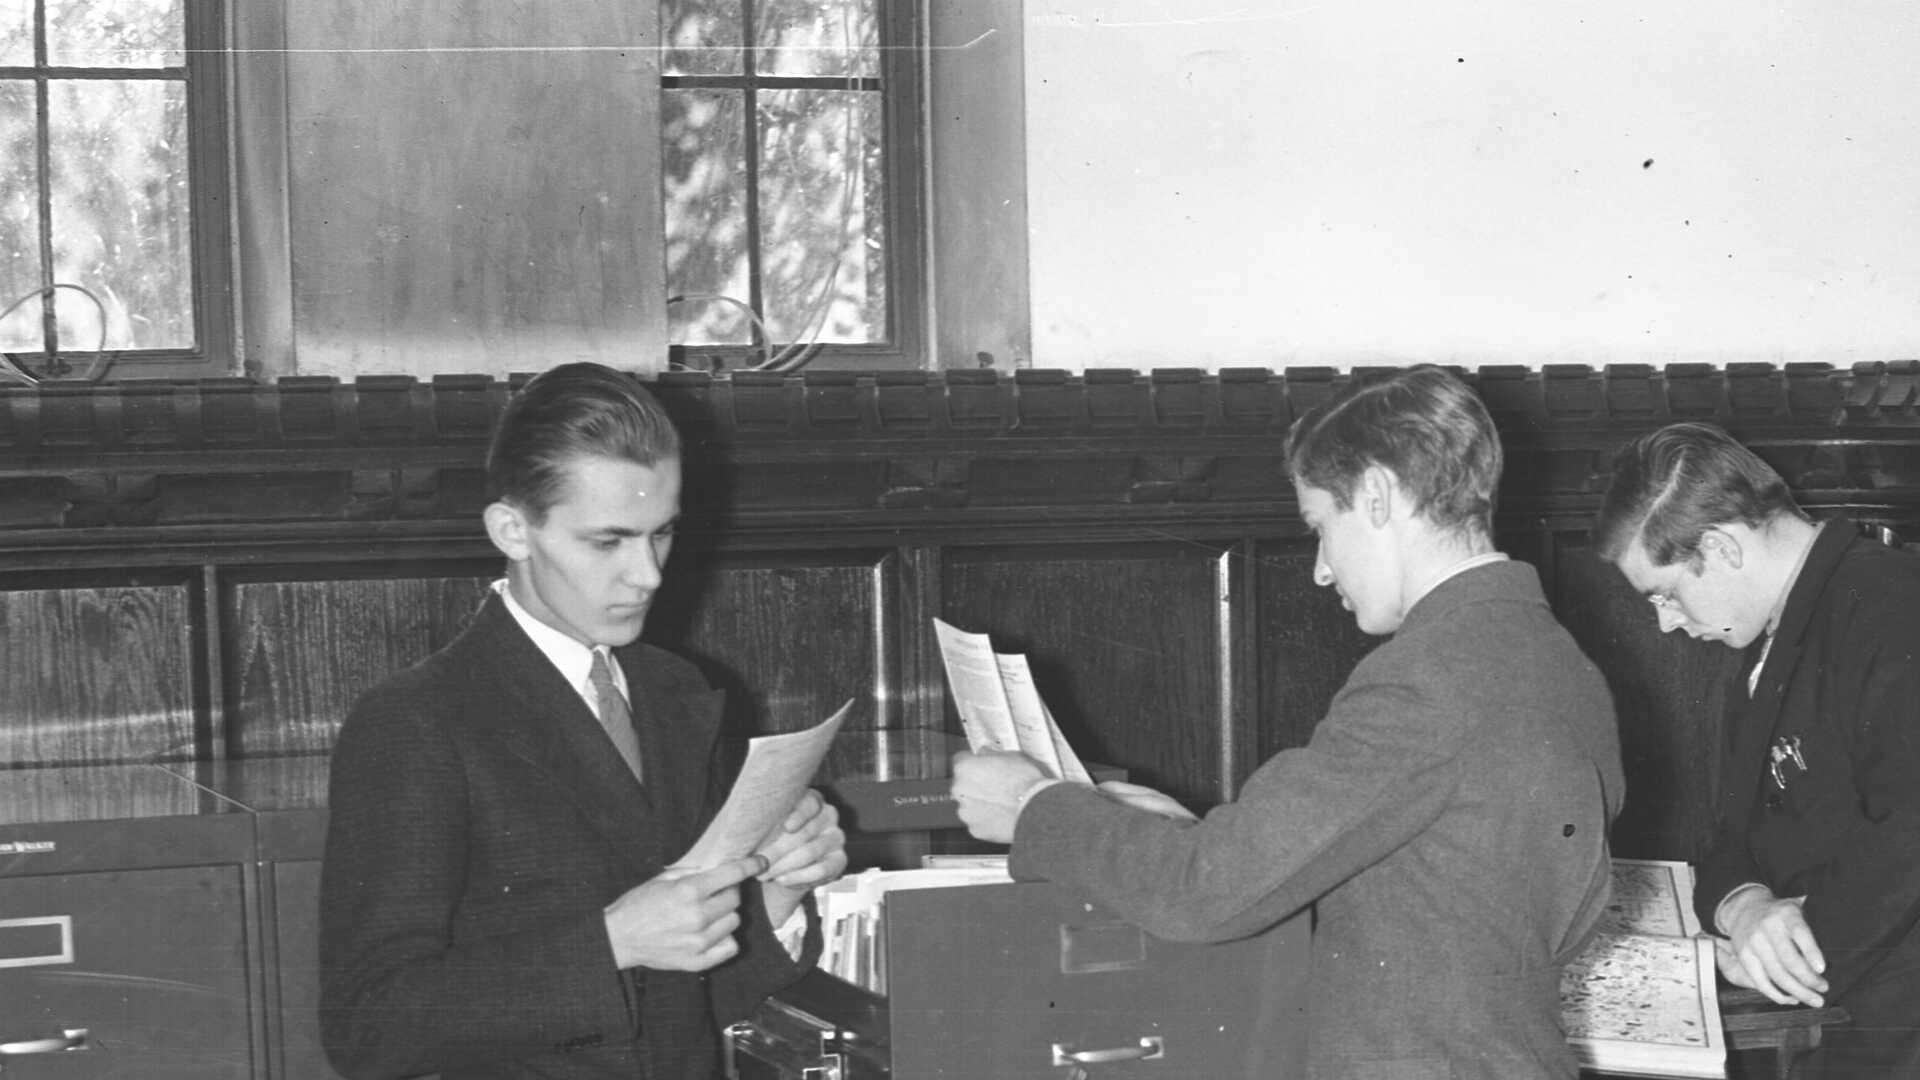 Archival photo of students using a vertical file